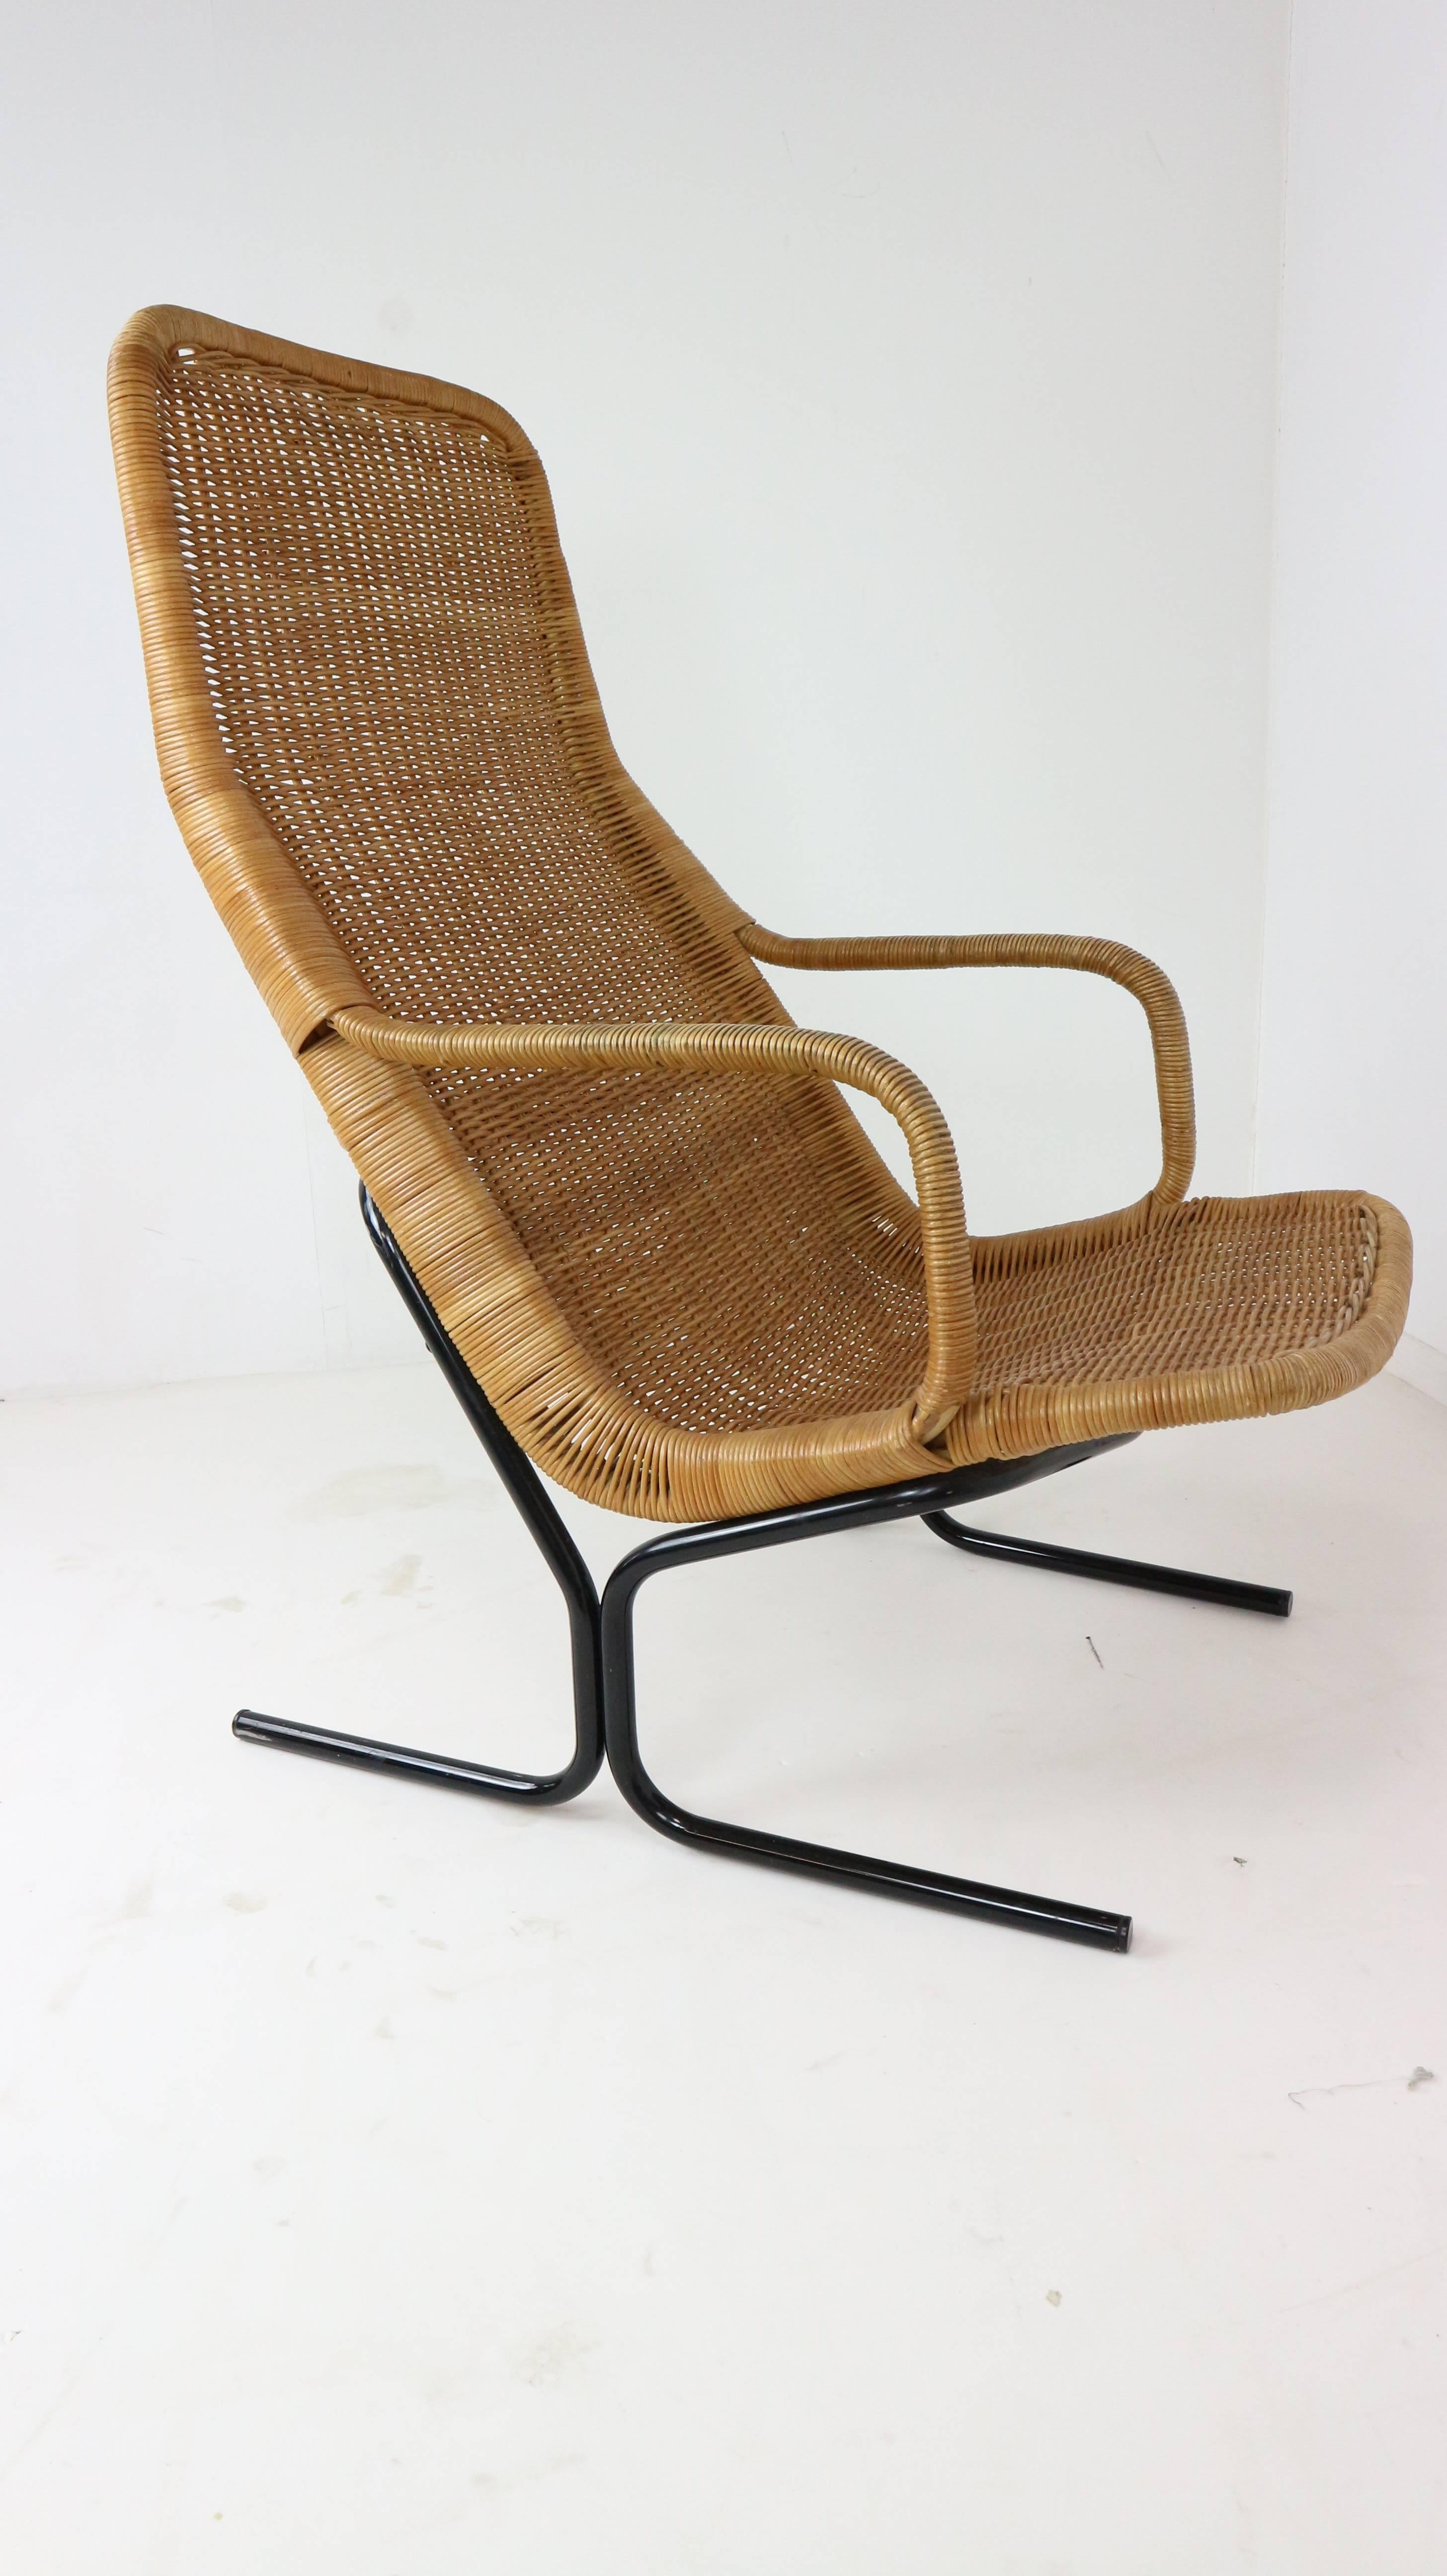 Lounge chair model 514 which was designed by Dirk Van Sliedrecht for 'Gebroeders Jonkers' in 1961 produced by Rohé Noordwolde. The chair features a black painted frame and matching ottoman.